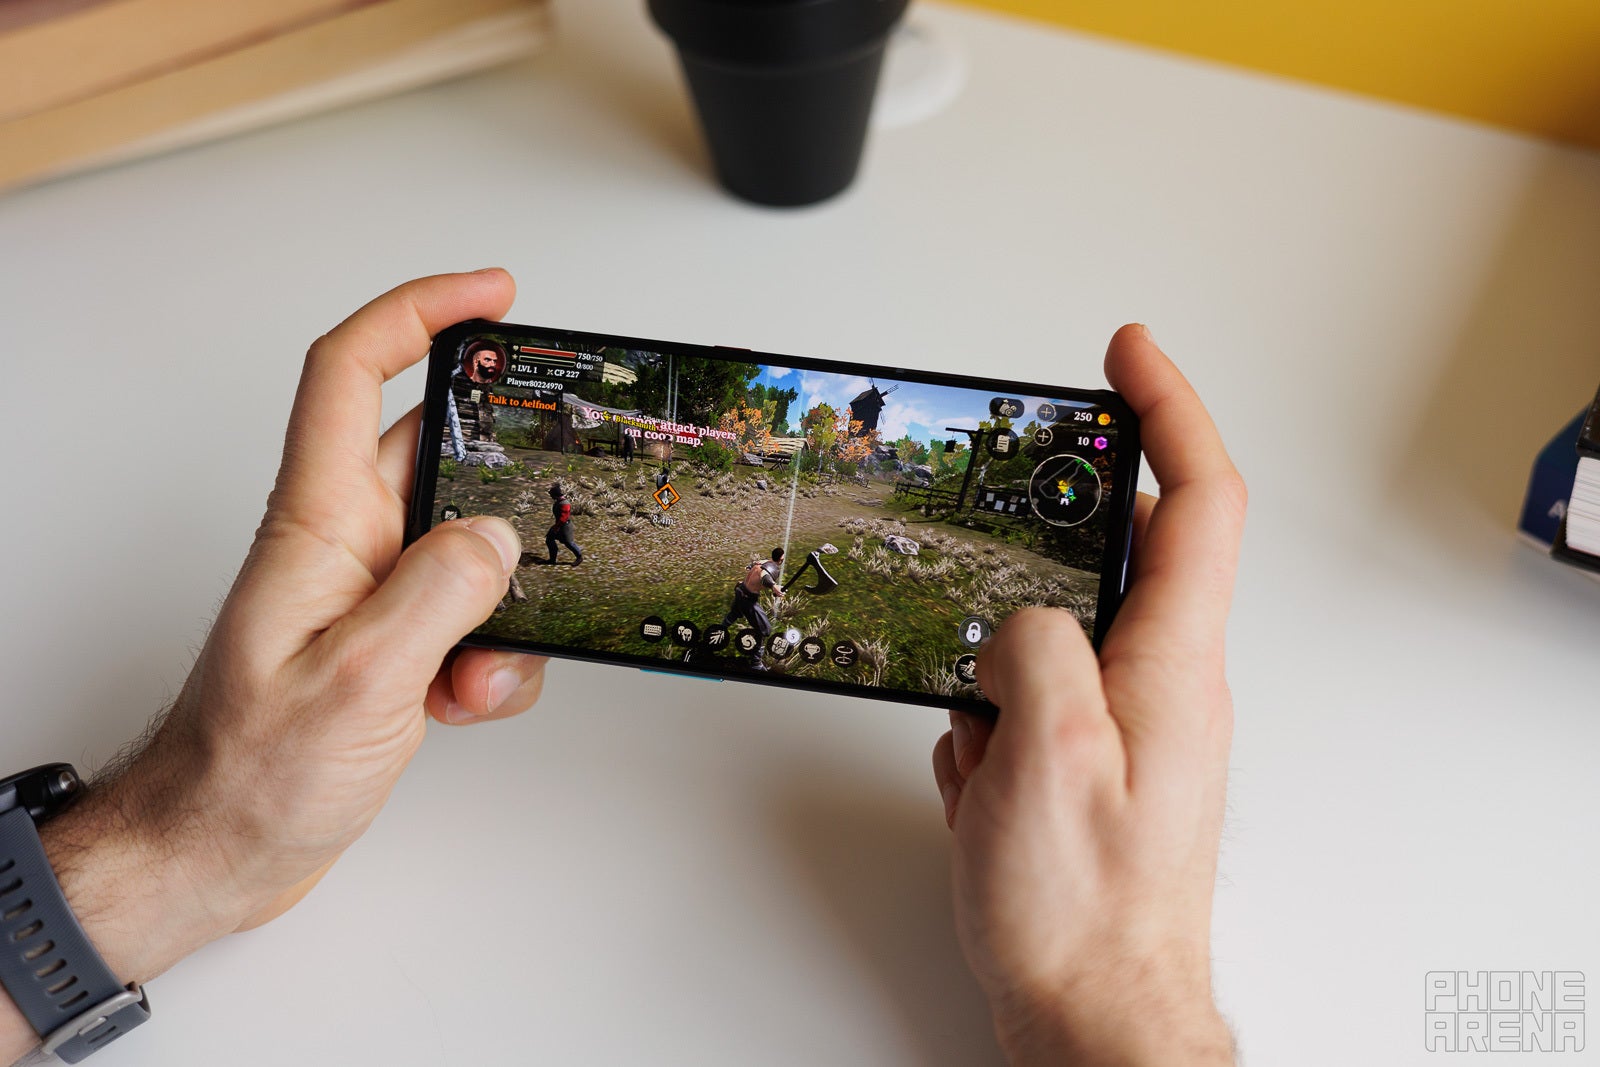 RedMagic 9 Pro launches with Snapdragon 8 Gen 3, incredible gaming features  - PhoneArena